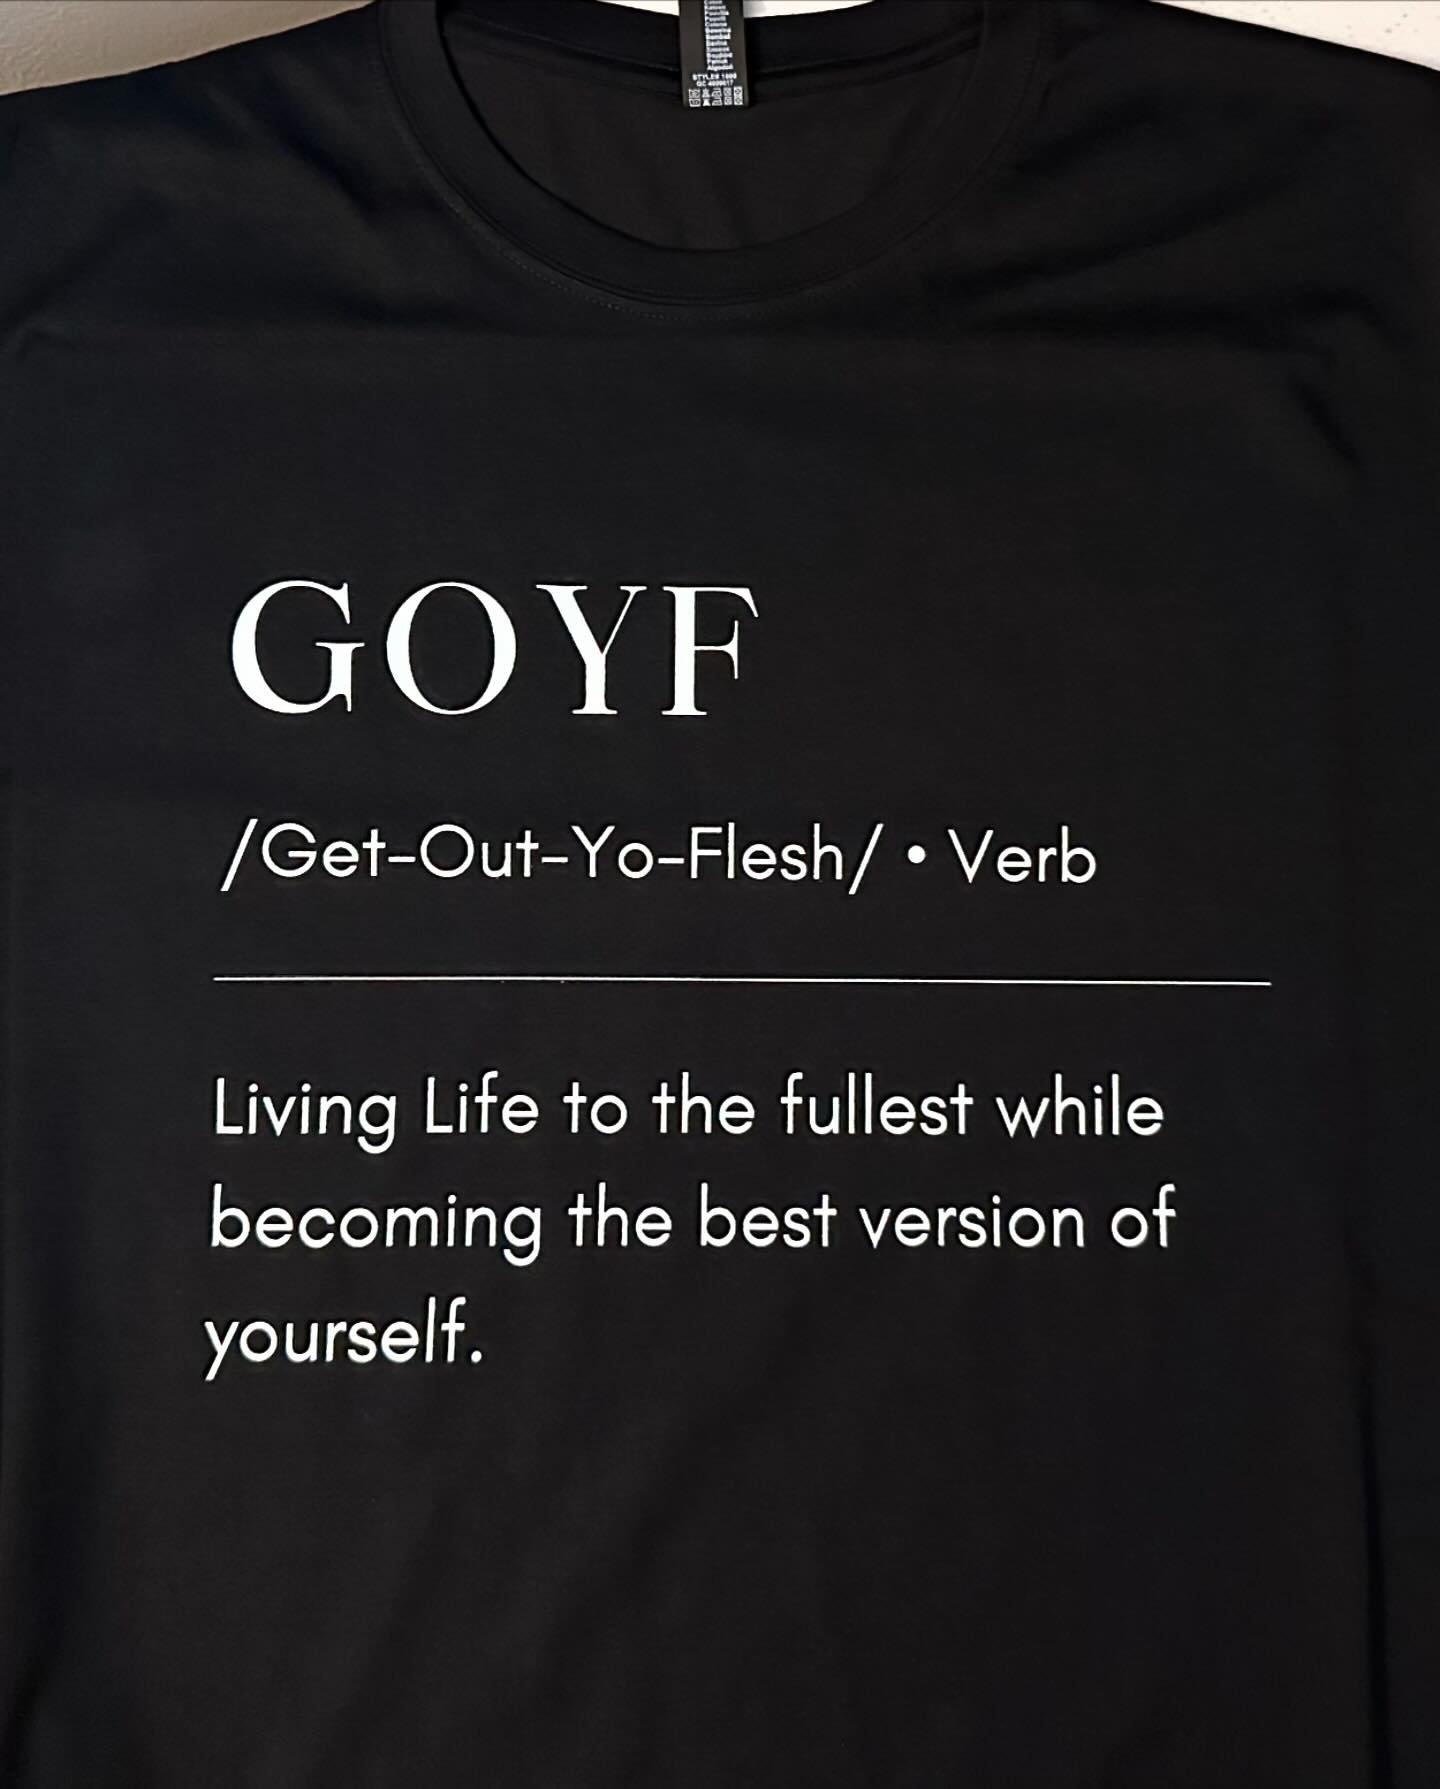 GOYF 
Get-Out-Yo-Flesh 
@jayson_jvc 
.
Living life to the fullest while becoming the best version of yourself.